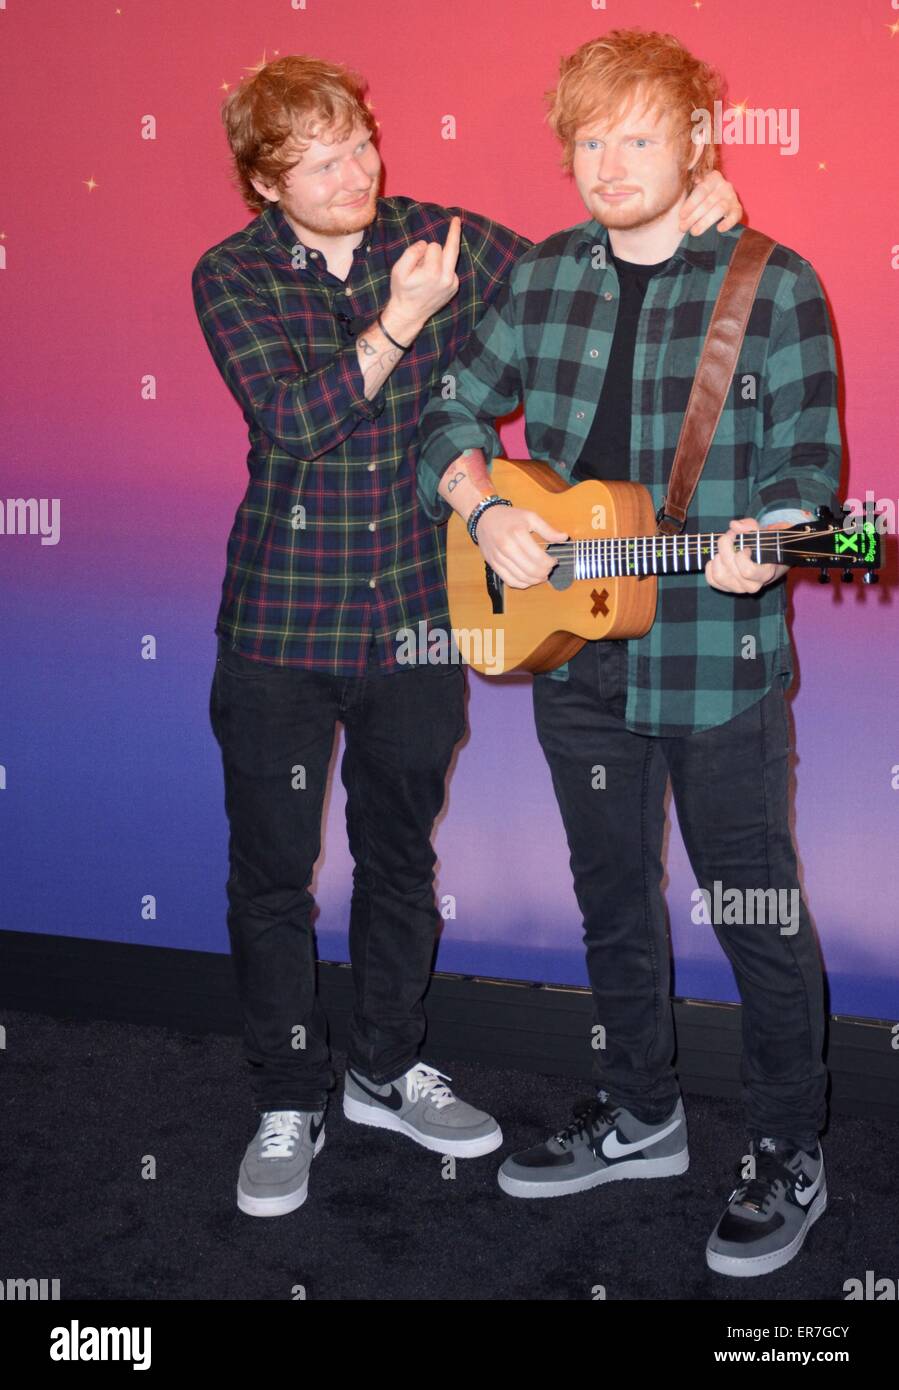 New York, NY, USA. 28th May, 2015. Ed Sheeran at a public appearance for Madame Tussauds Unveils Wax Figure of Ed Sheeran, Madame Tussauds New York, New York, NY May 28, 2015. Credit:  Derek Storm/Everett Collection/Alamy Live News Stock Photo